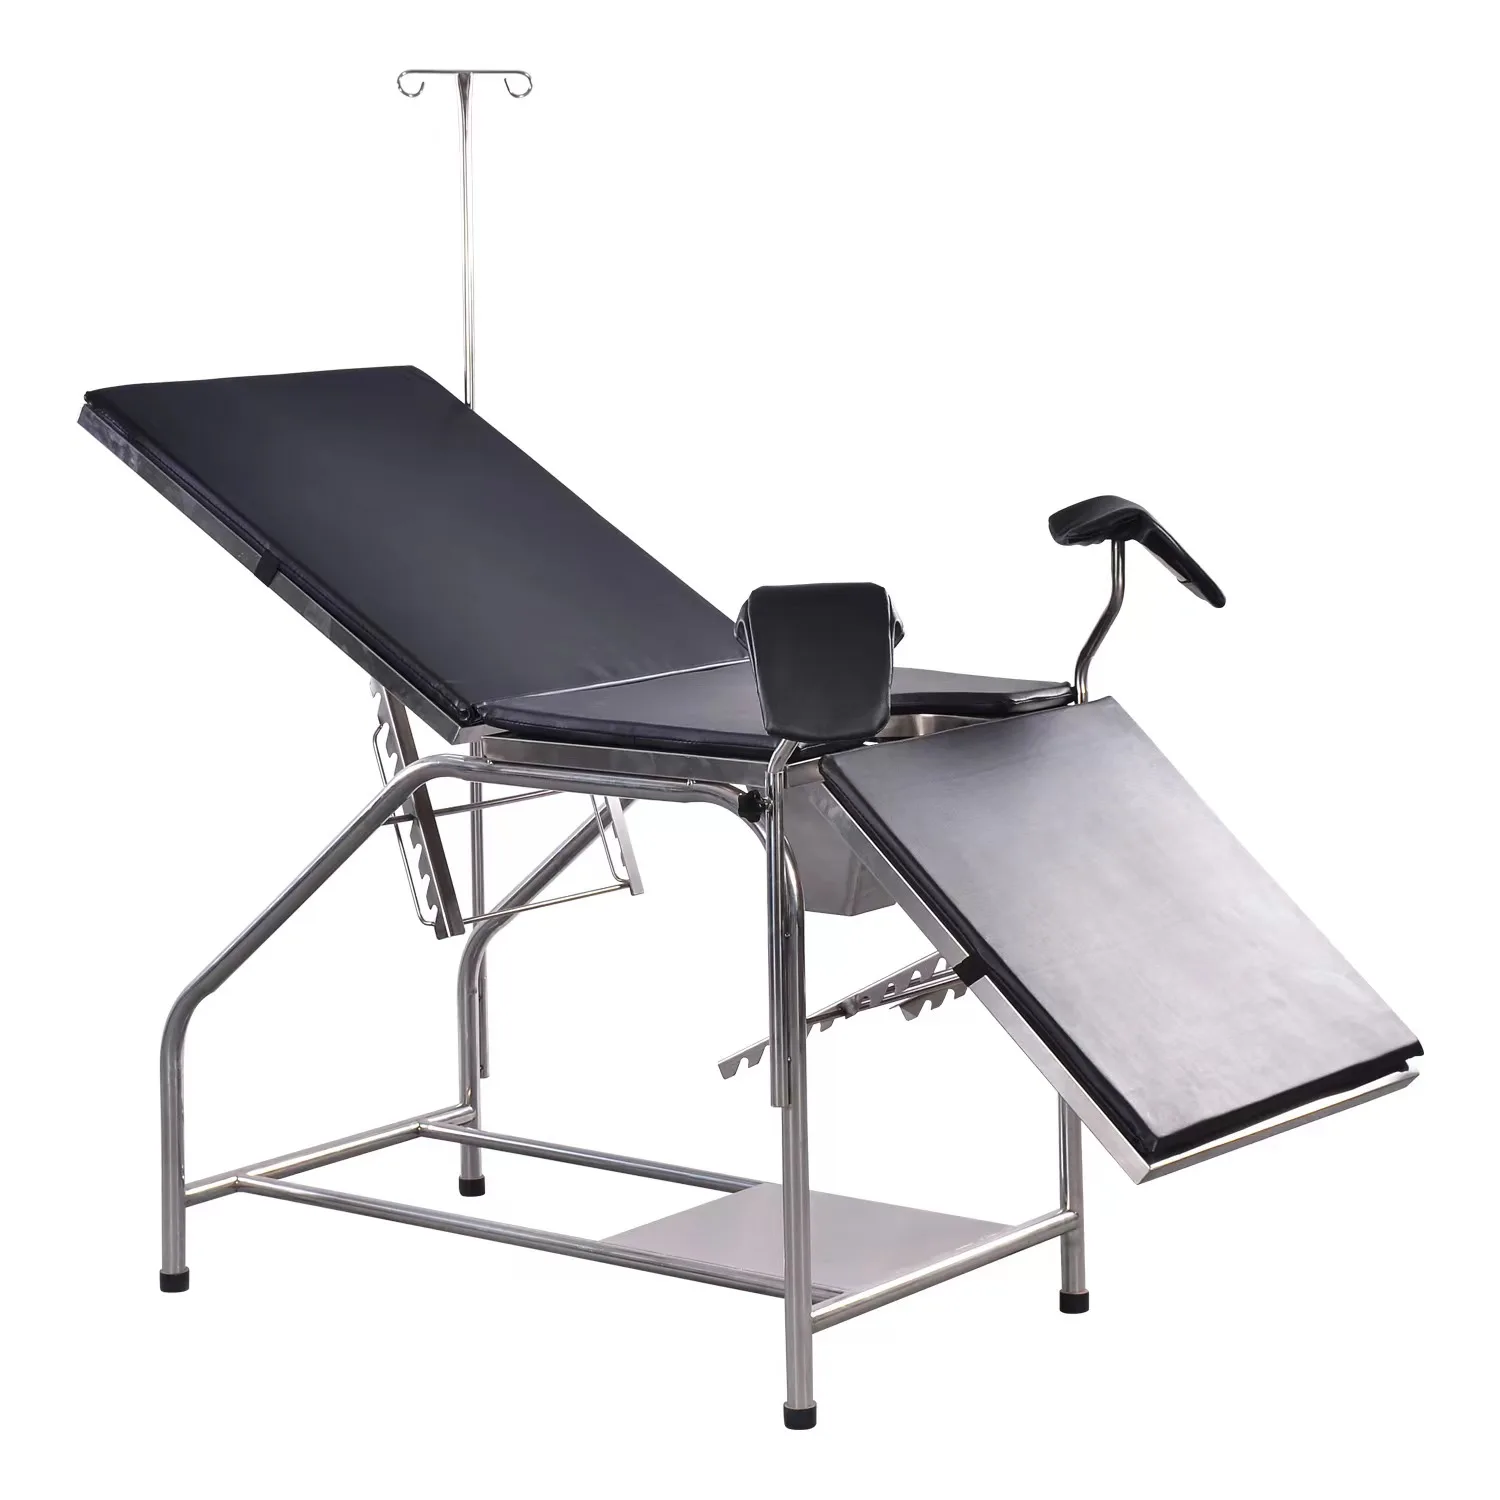 Clinic Examination Medical Birthing Hospital Gynecological Obstetric Delivery Bed Chairs Tables 